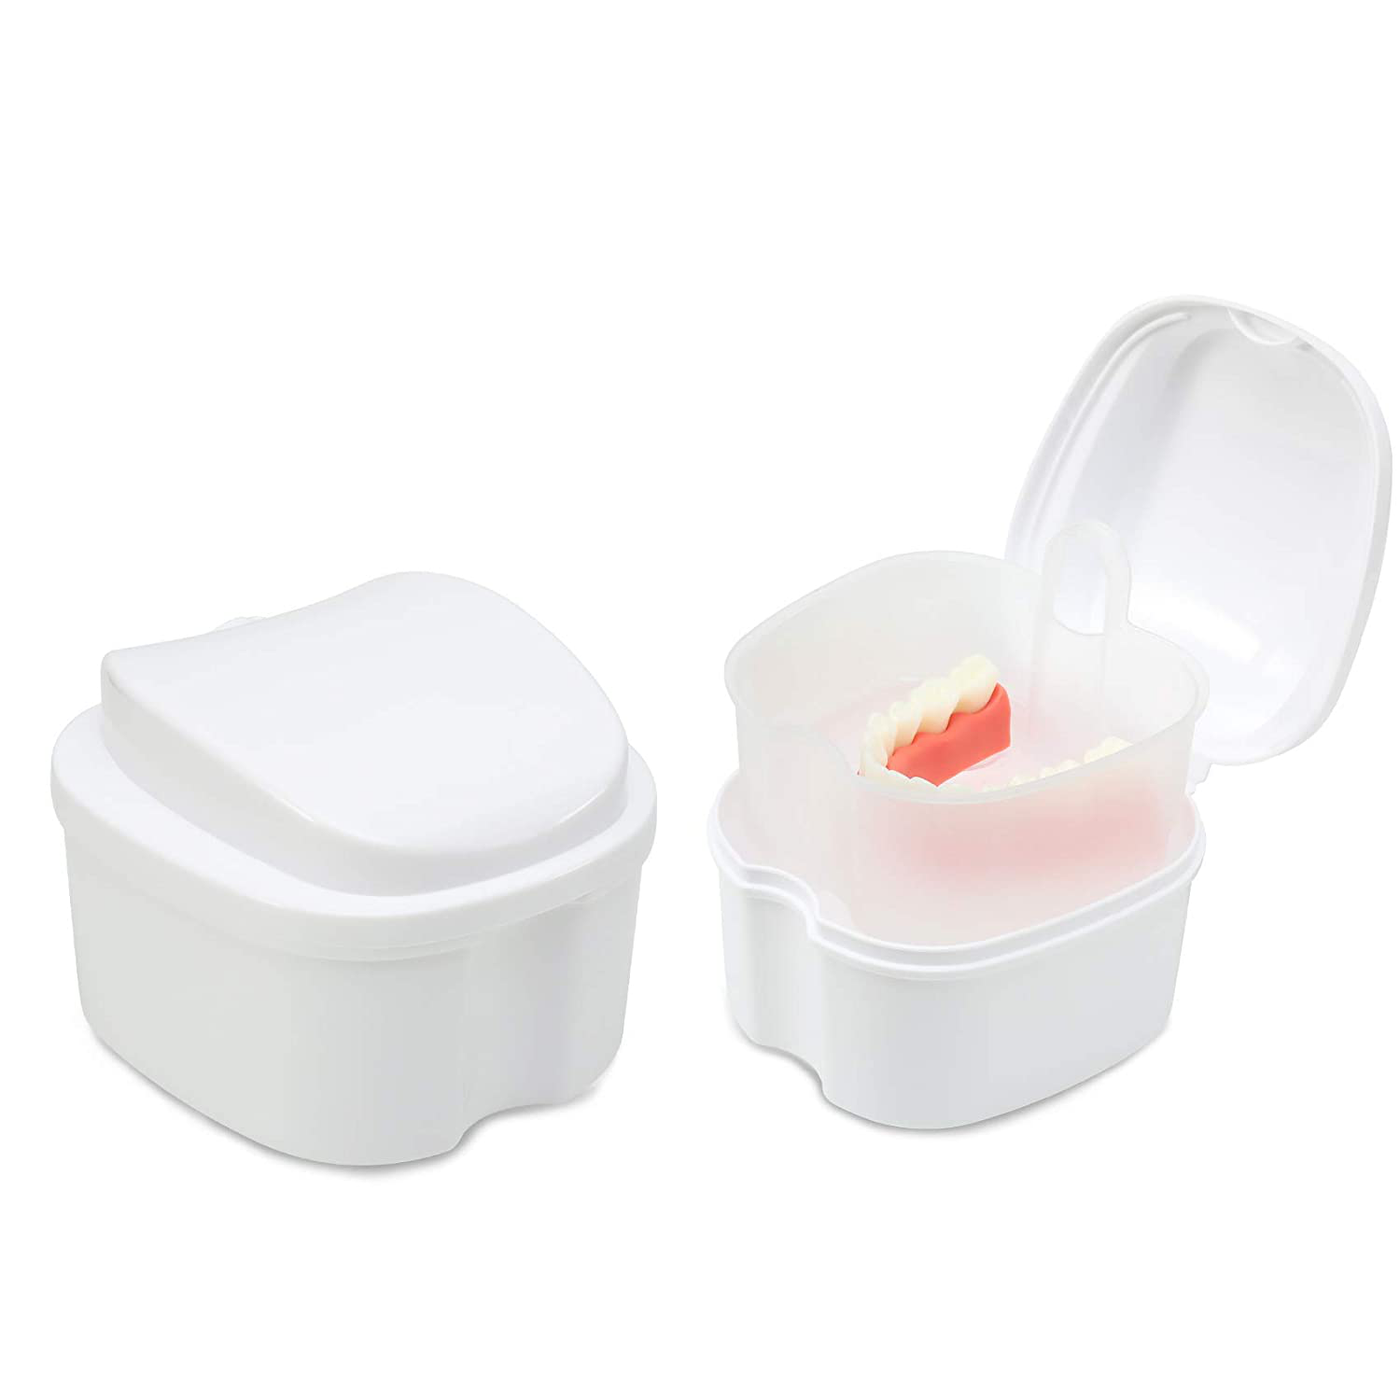 Annhua Denture Retainer Container Case Cleaning,Denture Bath Box False Teeth Storage Box - Leak Proof and Lid Waterproof